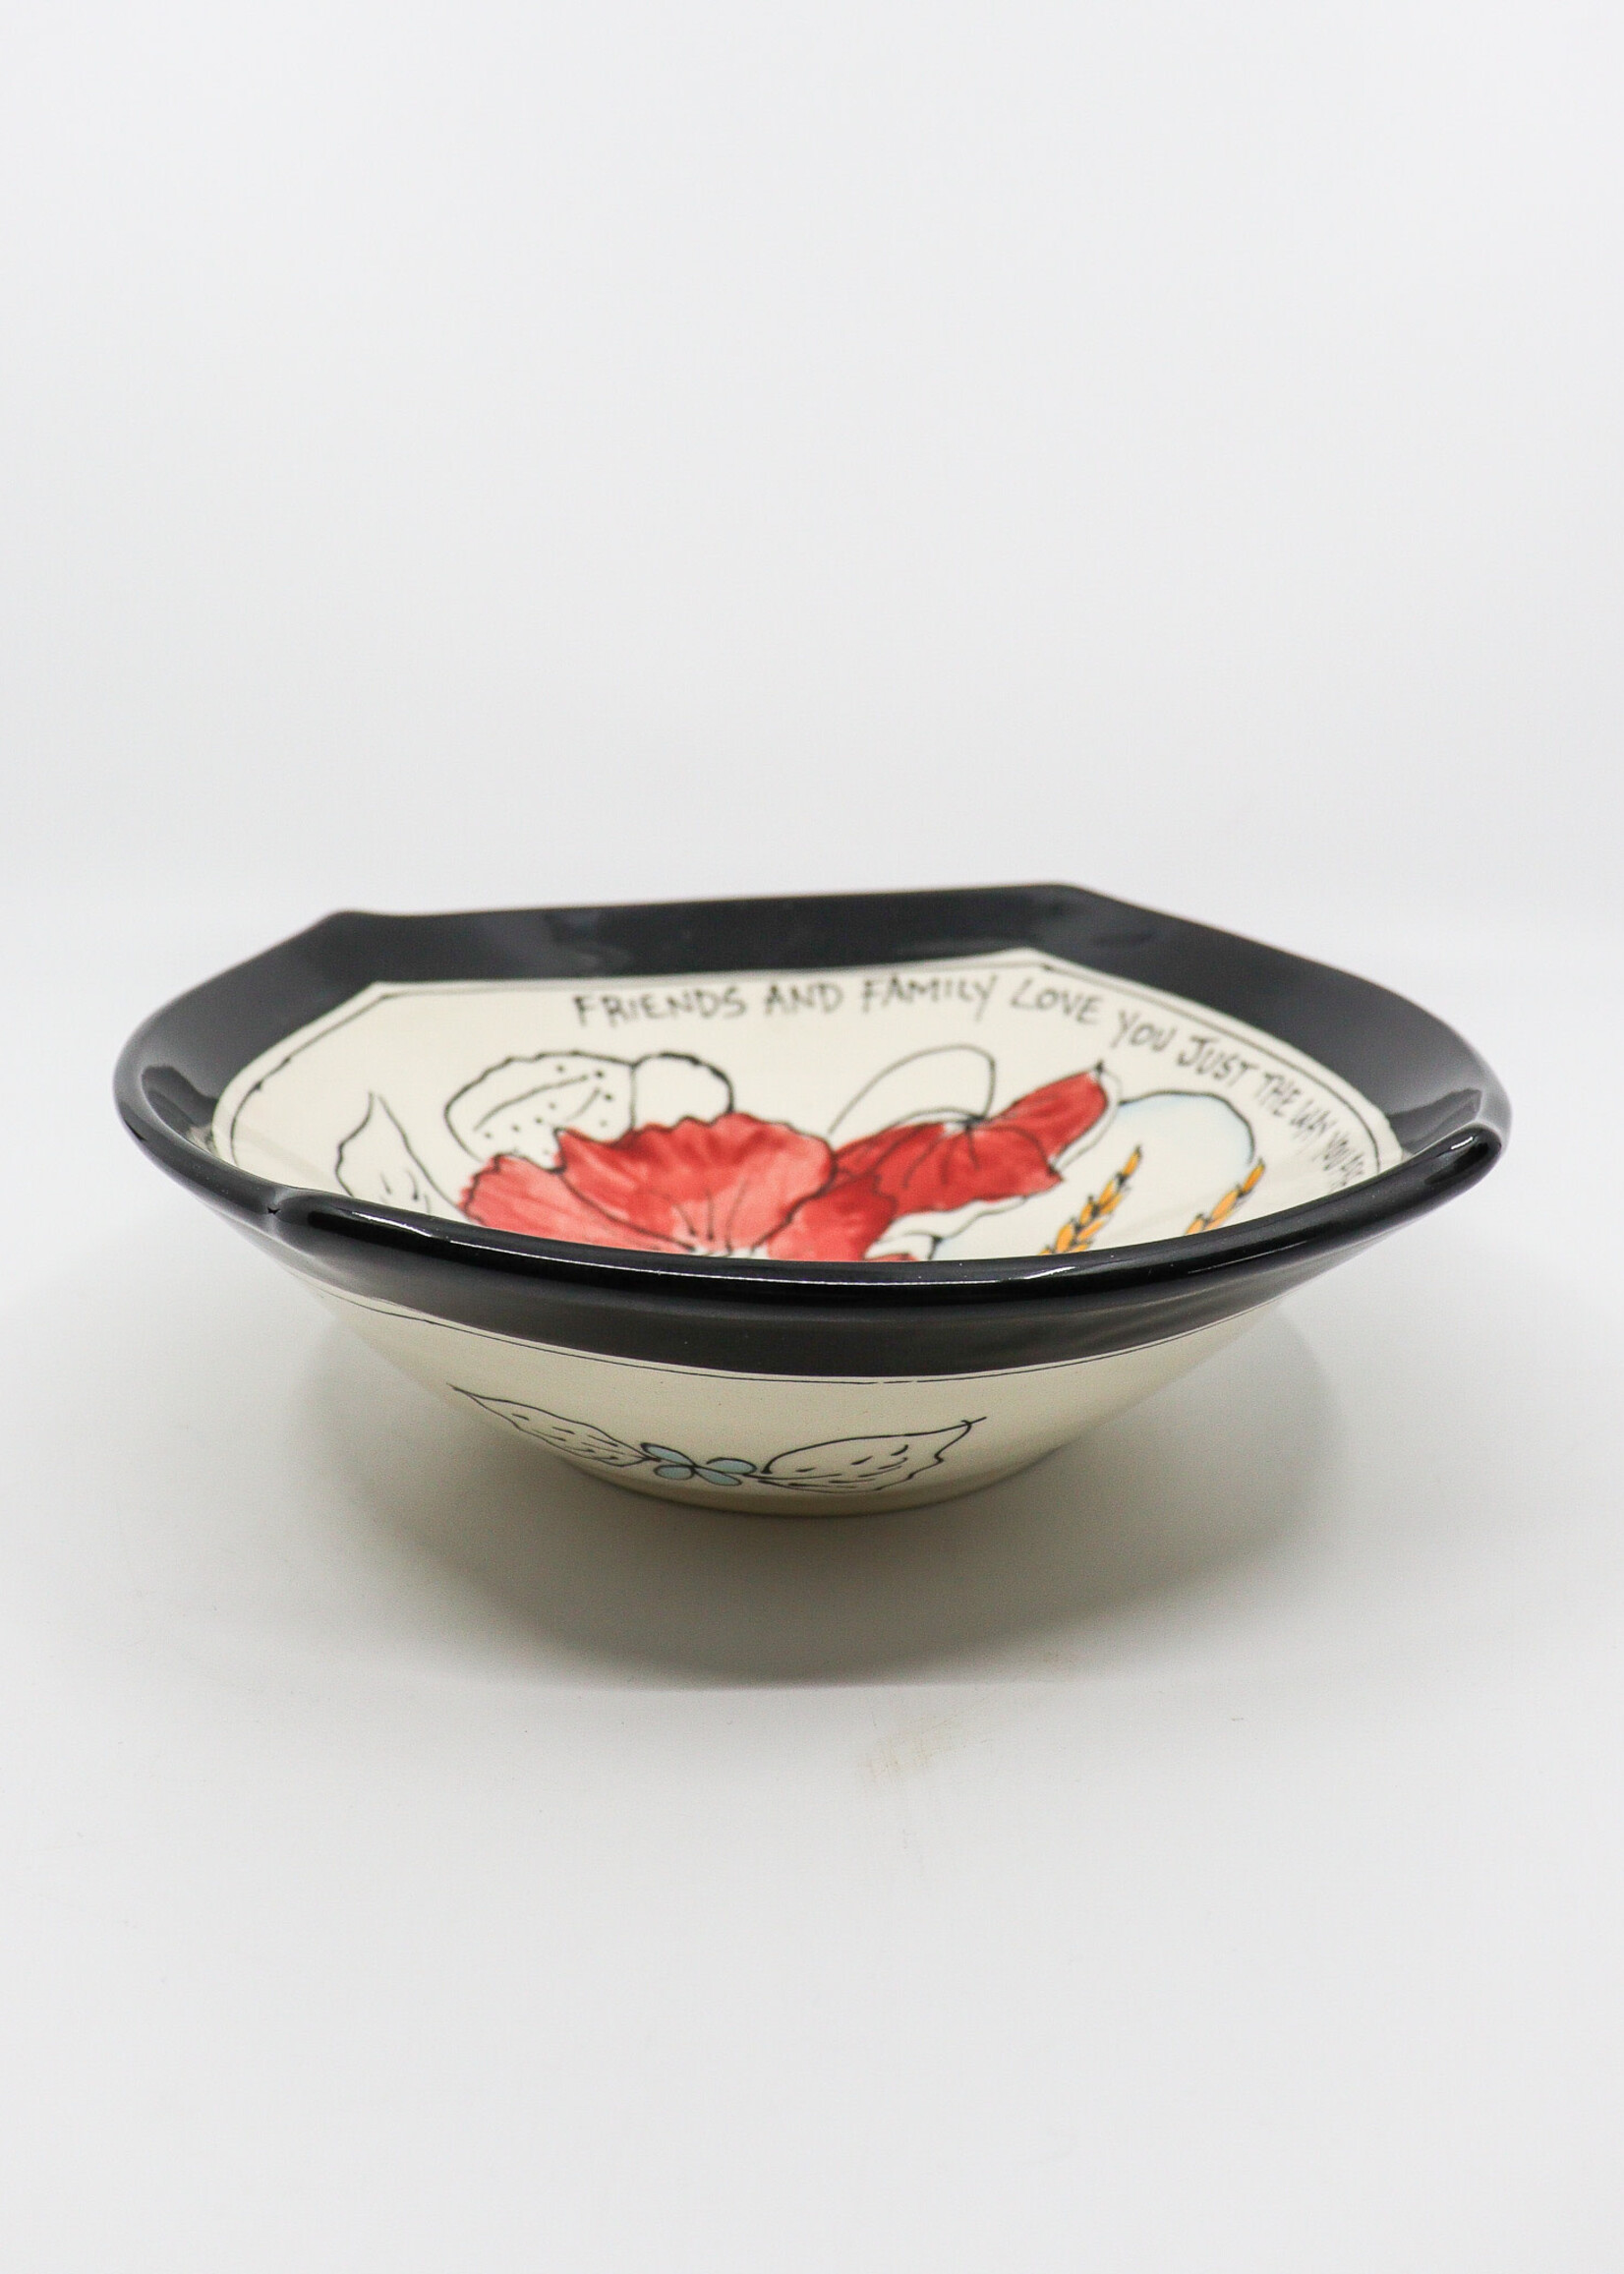 CERAMICS - 6" Bowl,  Poppies and Wheat, "Friends and Family Love You Just The Way You Are"